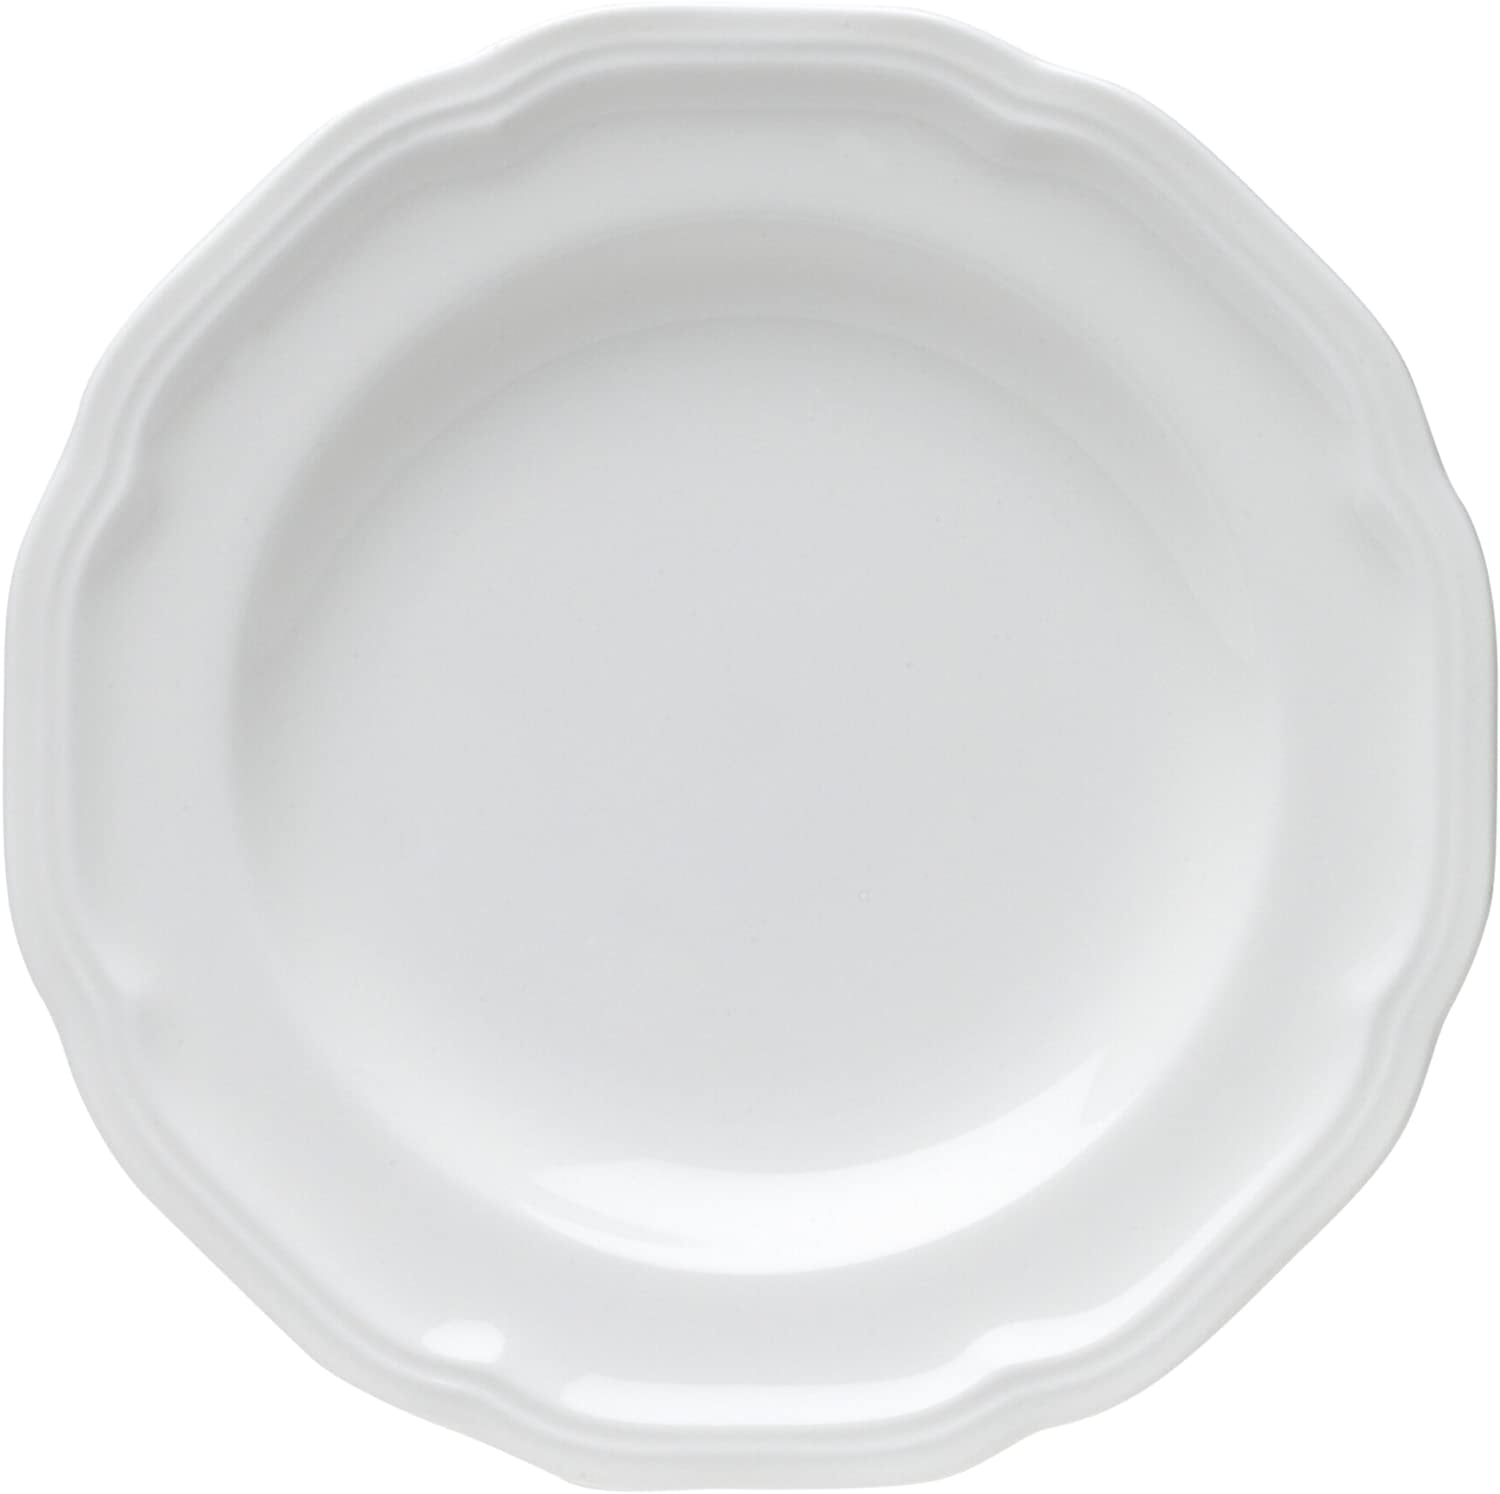 Mikasa Antique White Bread and Butter Plate 7-Inch HK400-203 